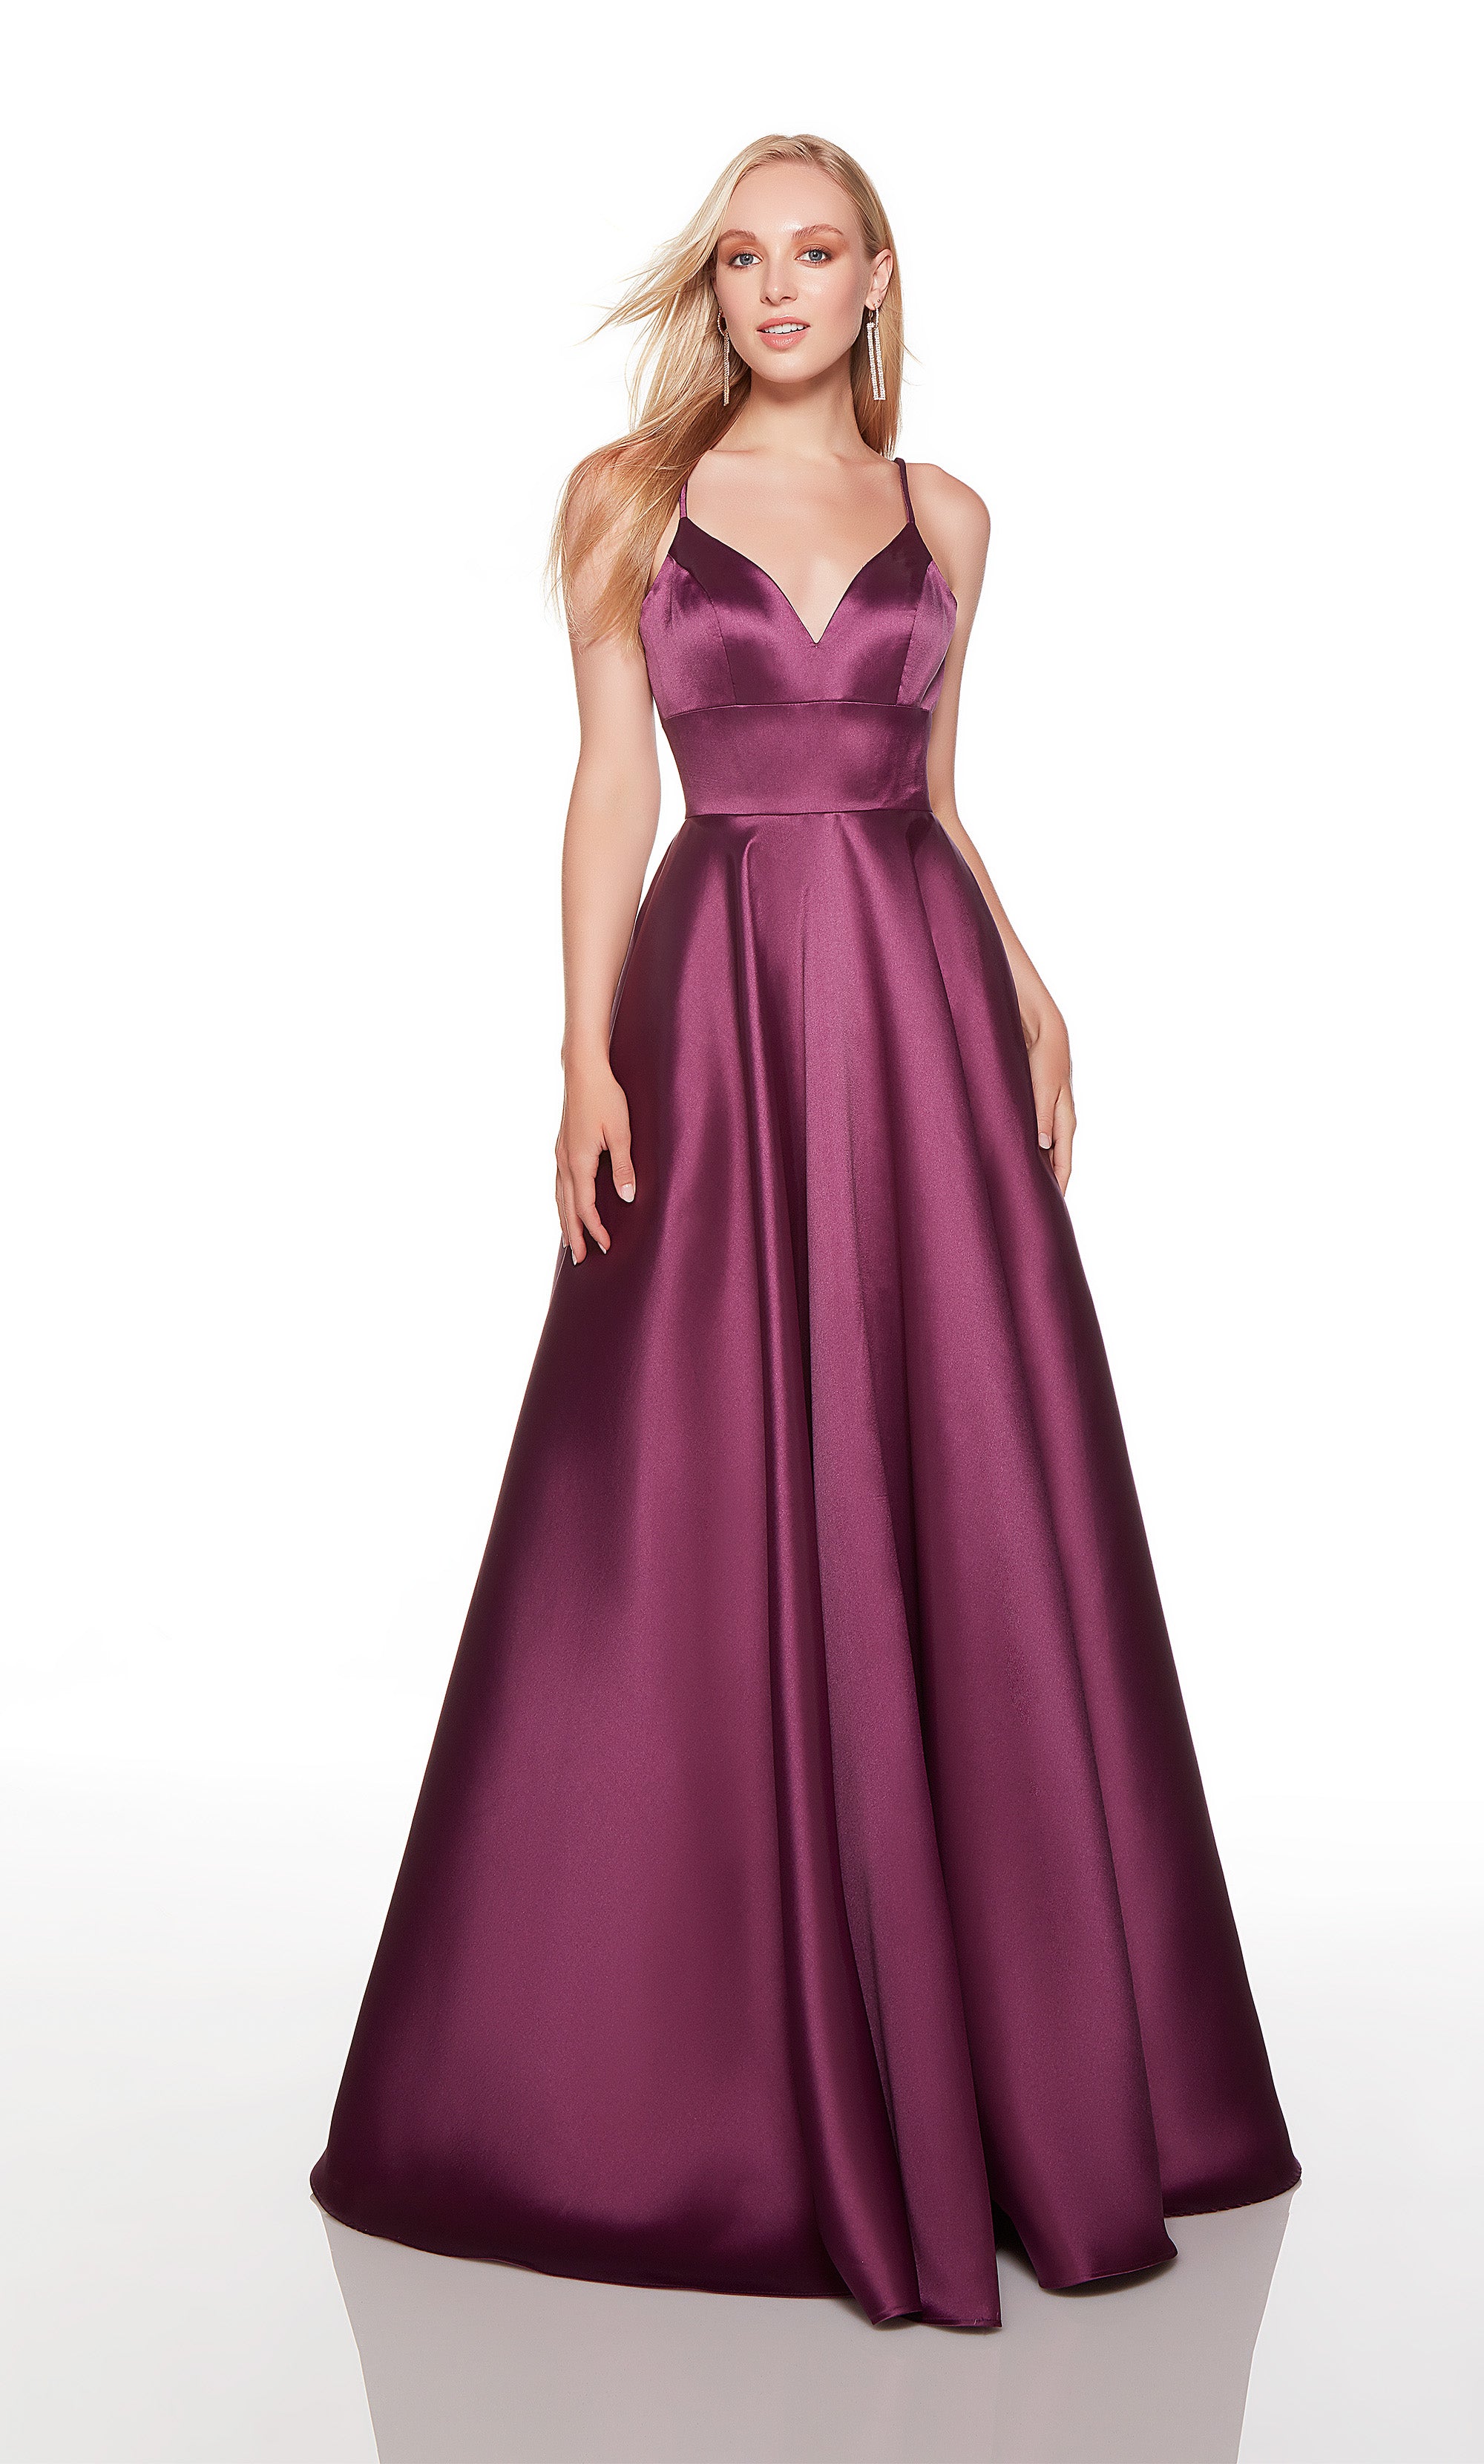 Sweetheart ballgown prom dress with pockets in the color black plum. COLOR-SWATCH_1754__BLACK-PLUM